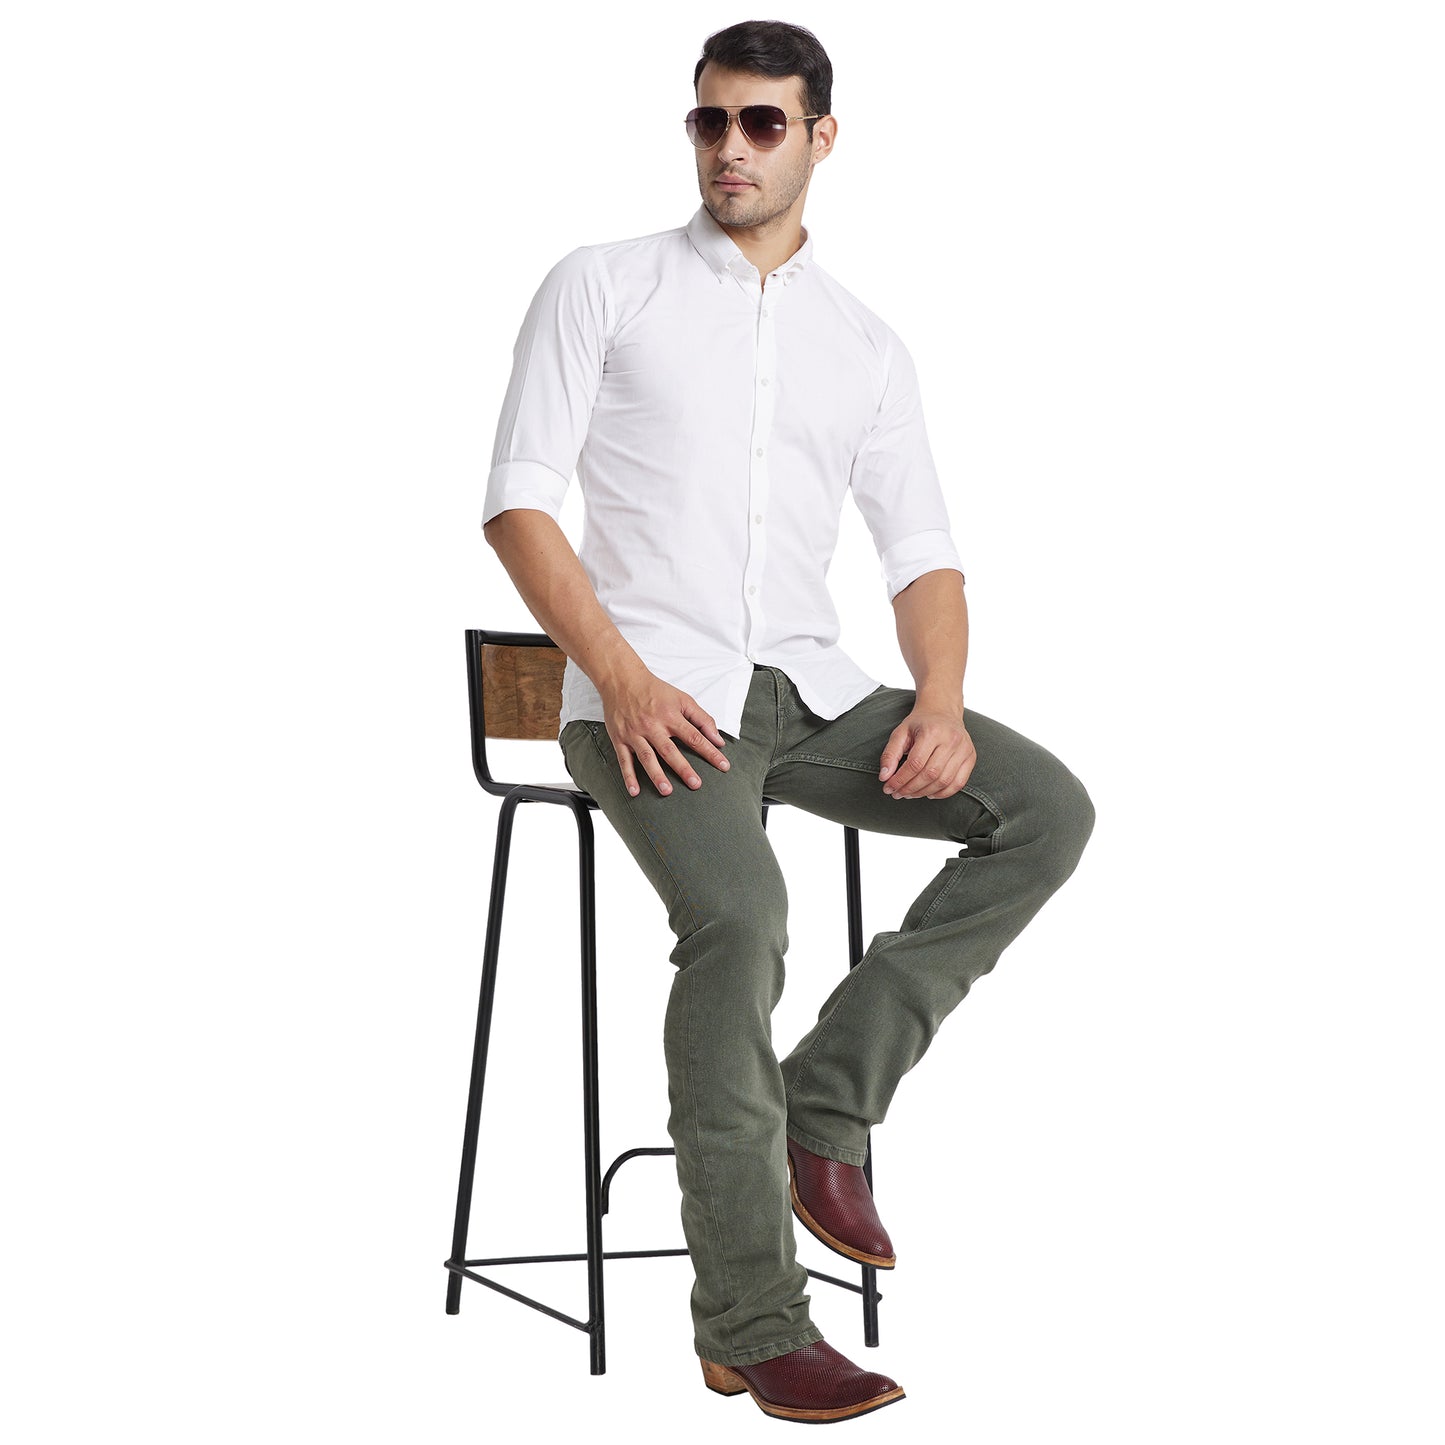 Mode De Base Mens's Casual  Slim Fit Olive Green Bootcut Jeans (Olive Green)